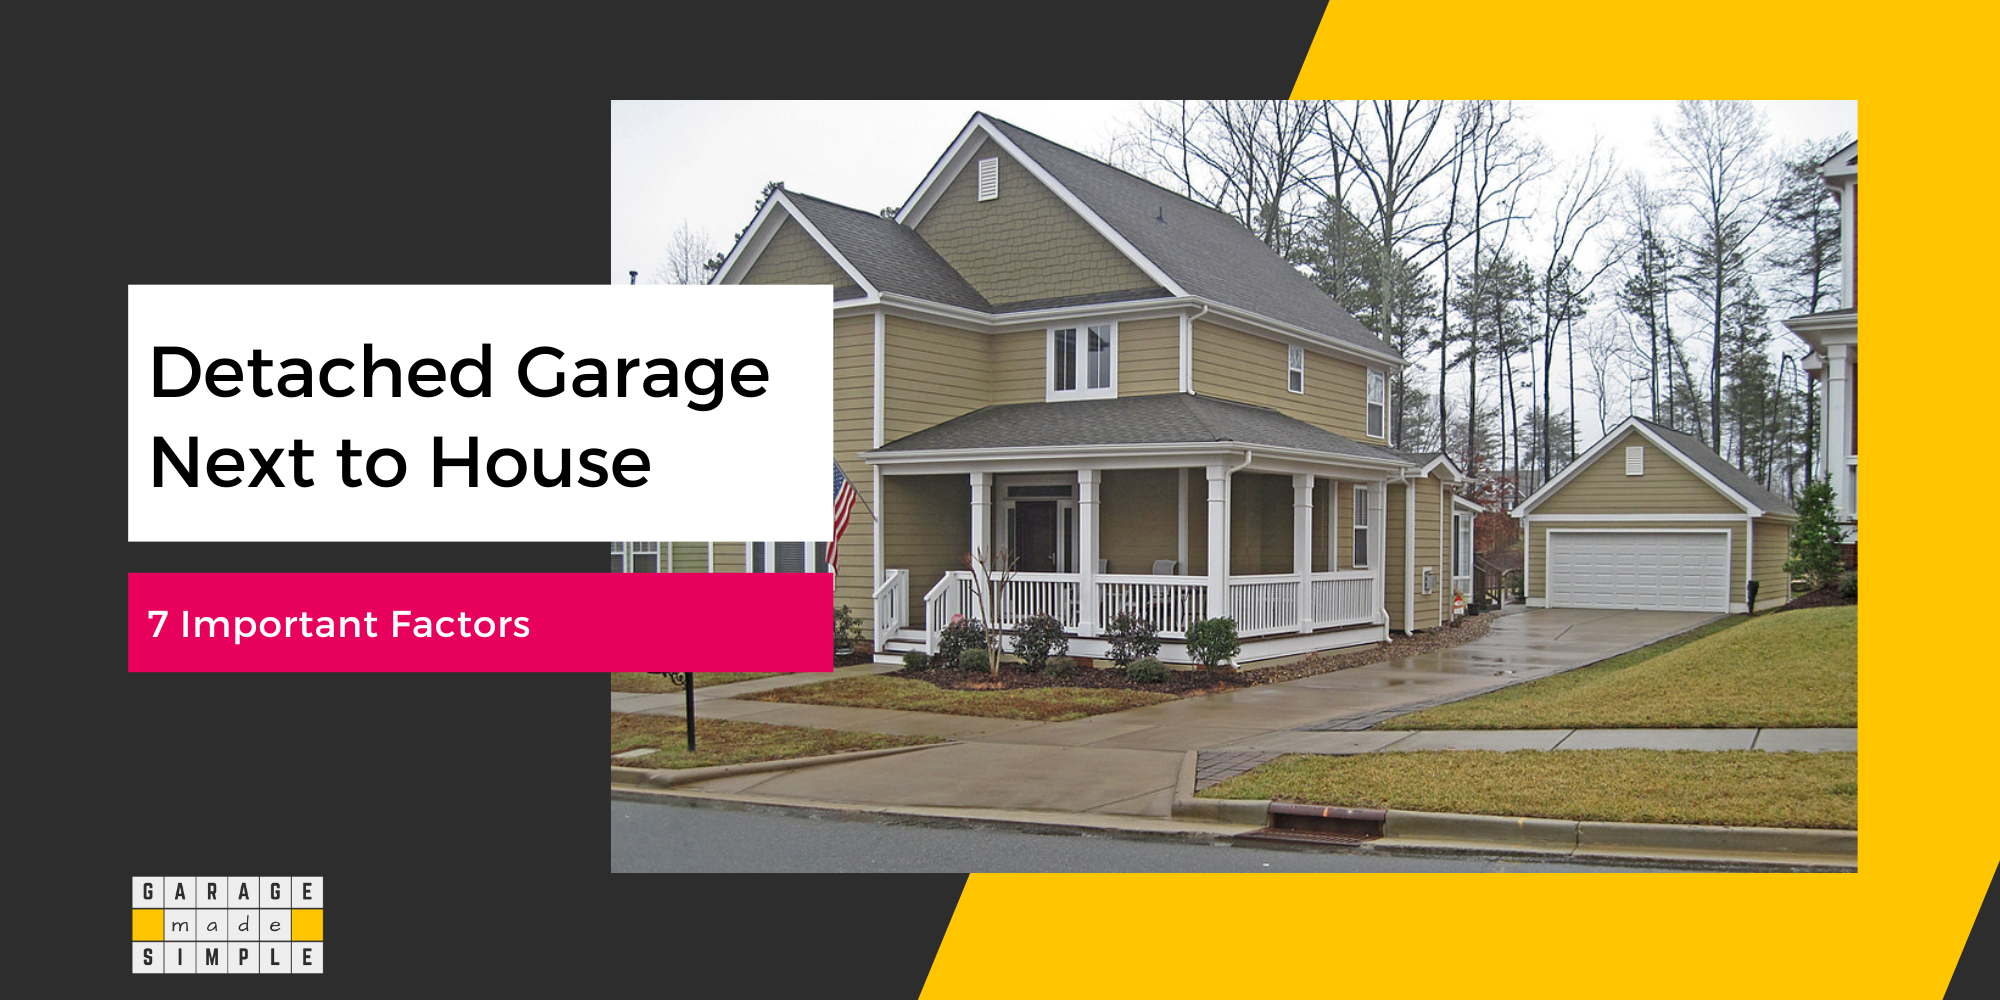 7 Must-Knows for Your Detached Garage Next to House